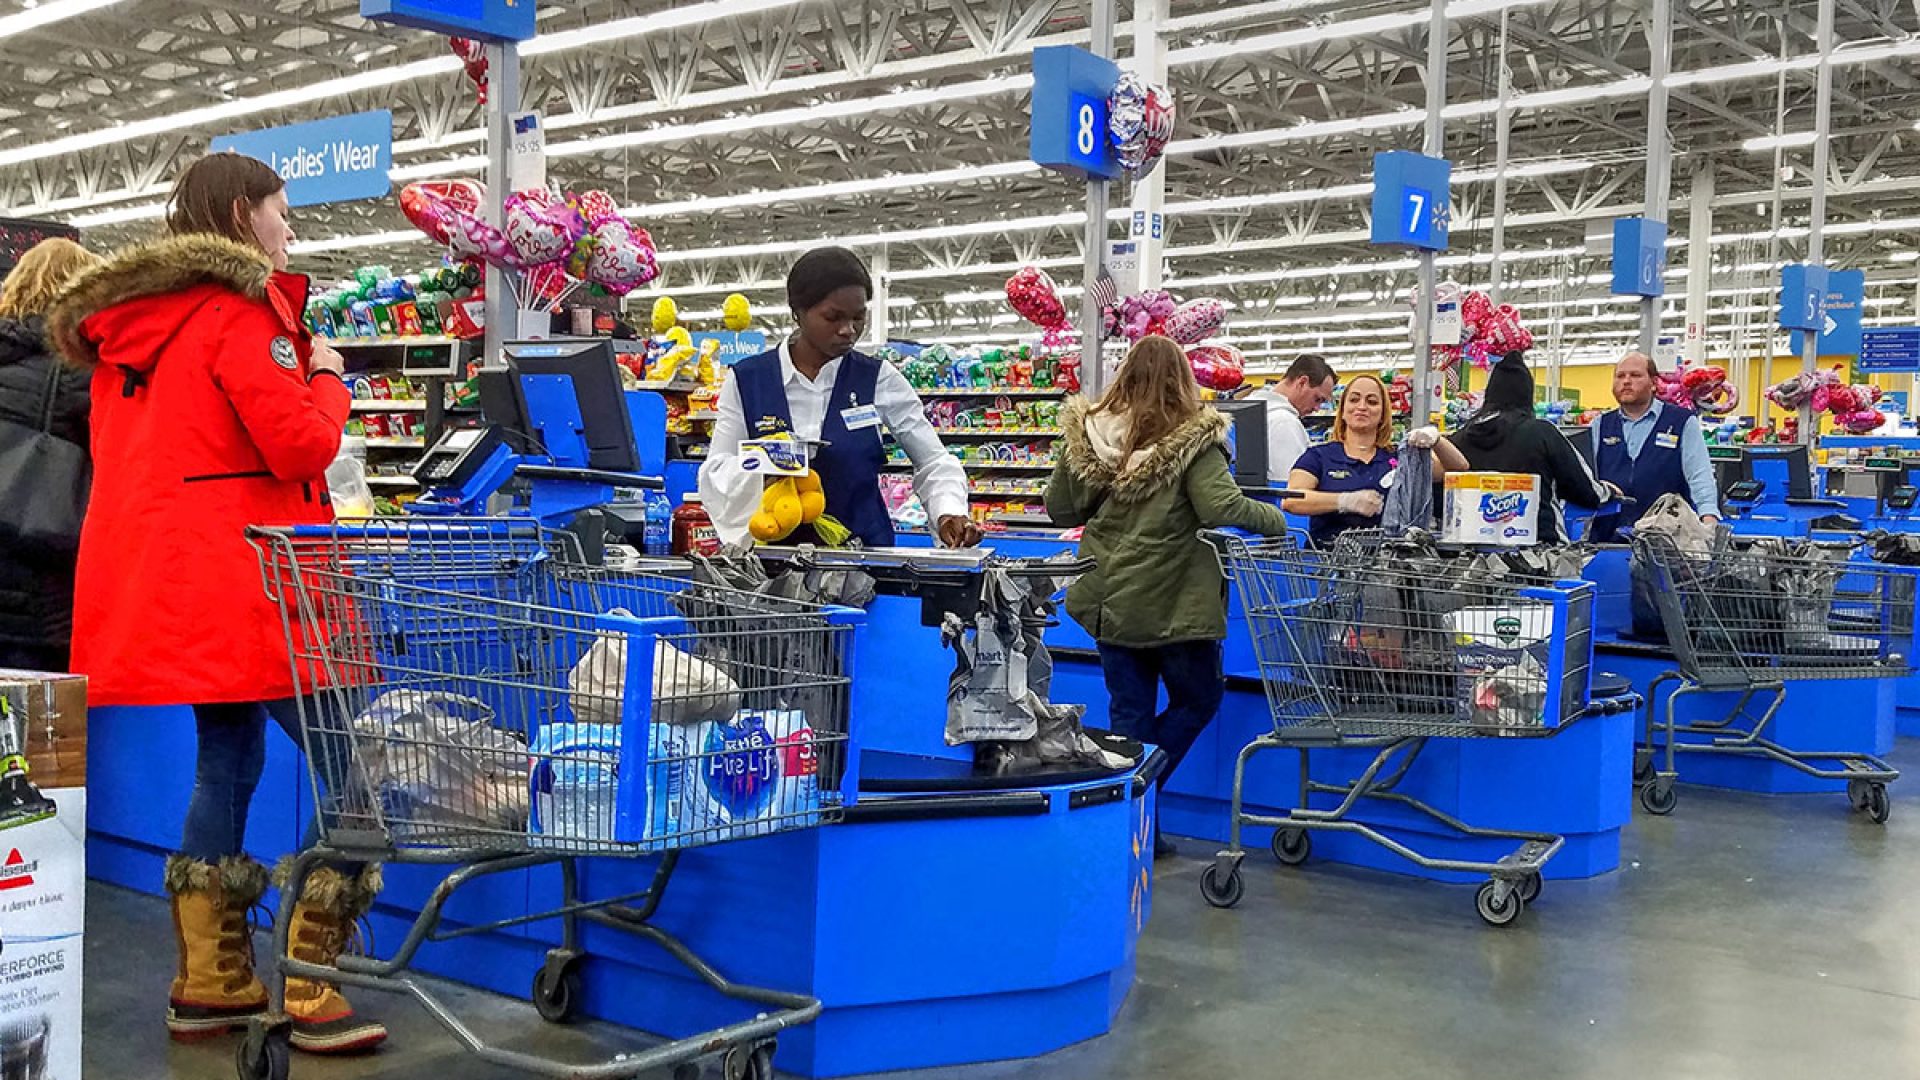 Walmart Is Extending Its Store Hours at Locations Nationwide - Eat This Not That